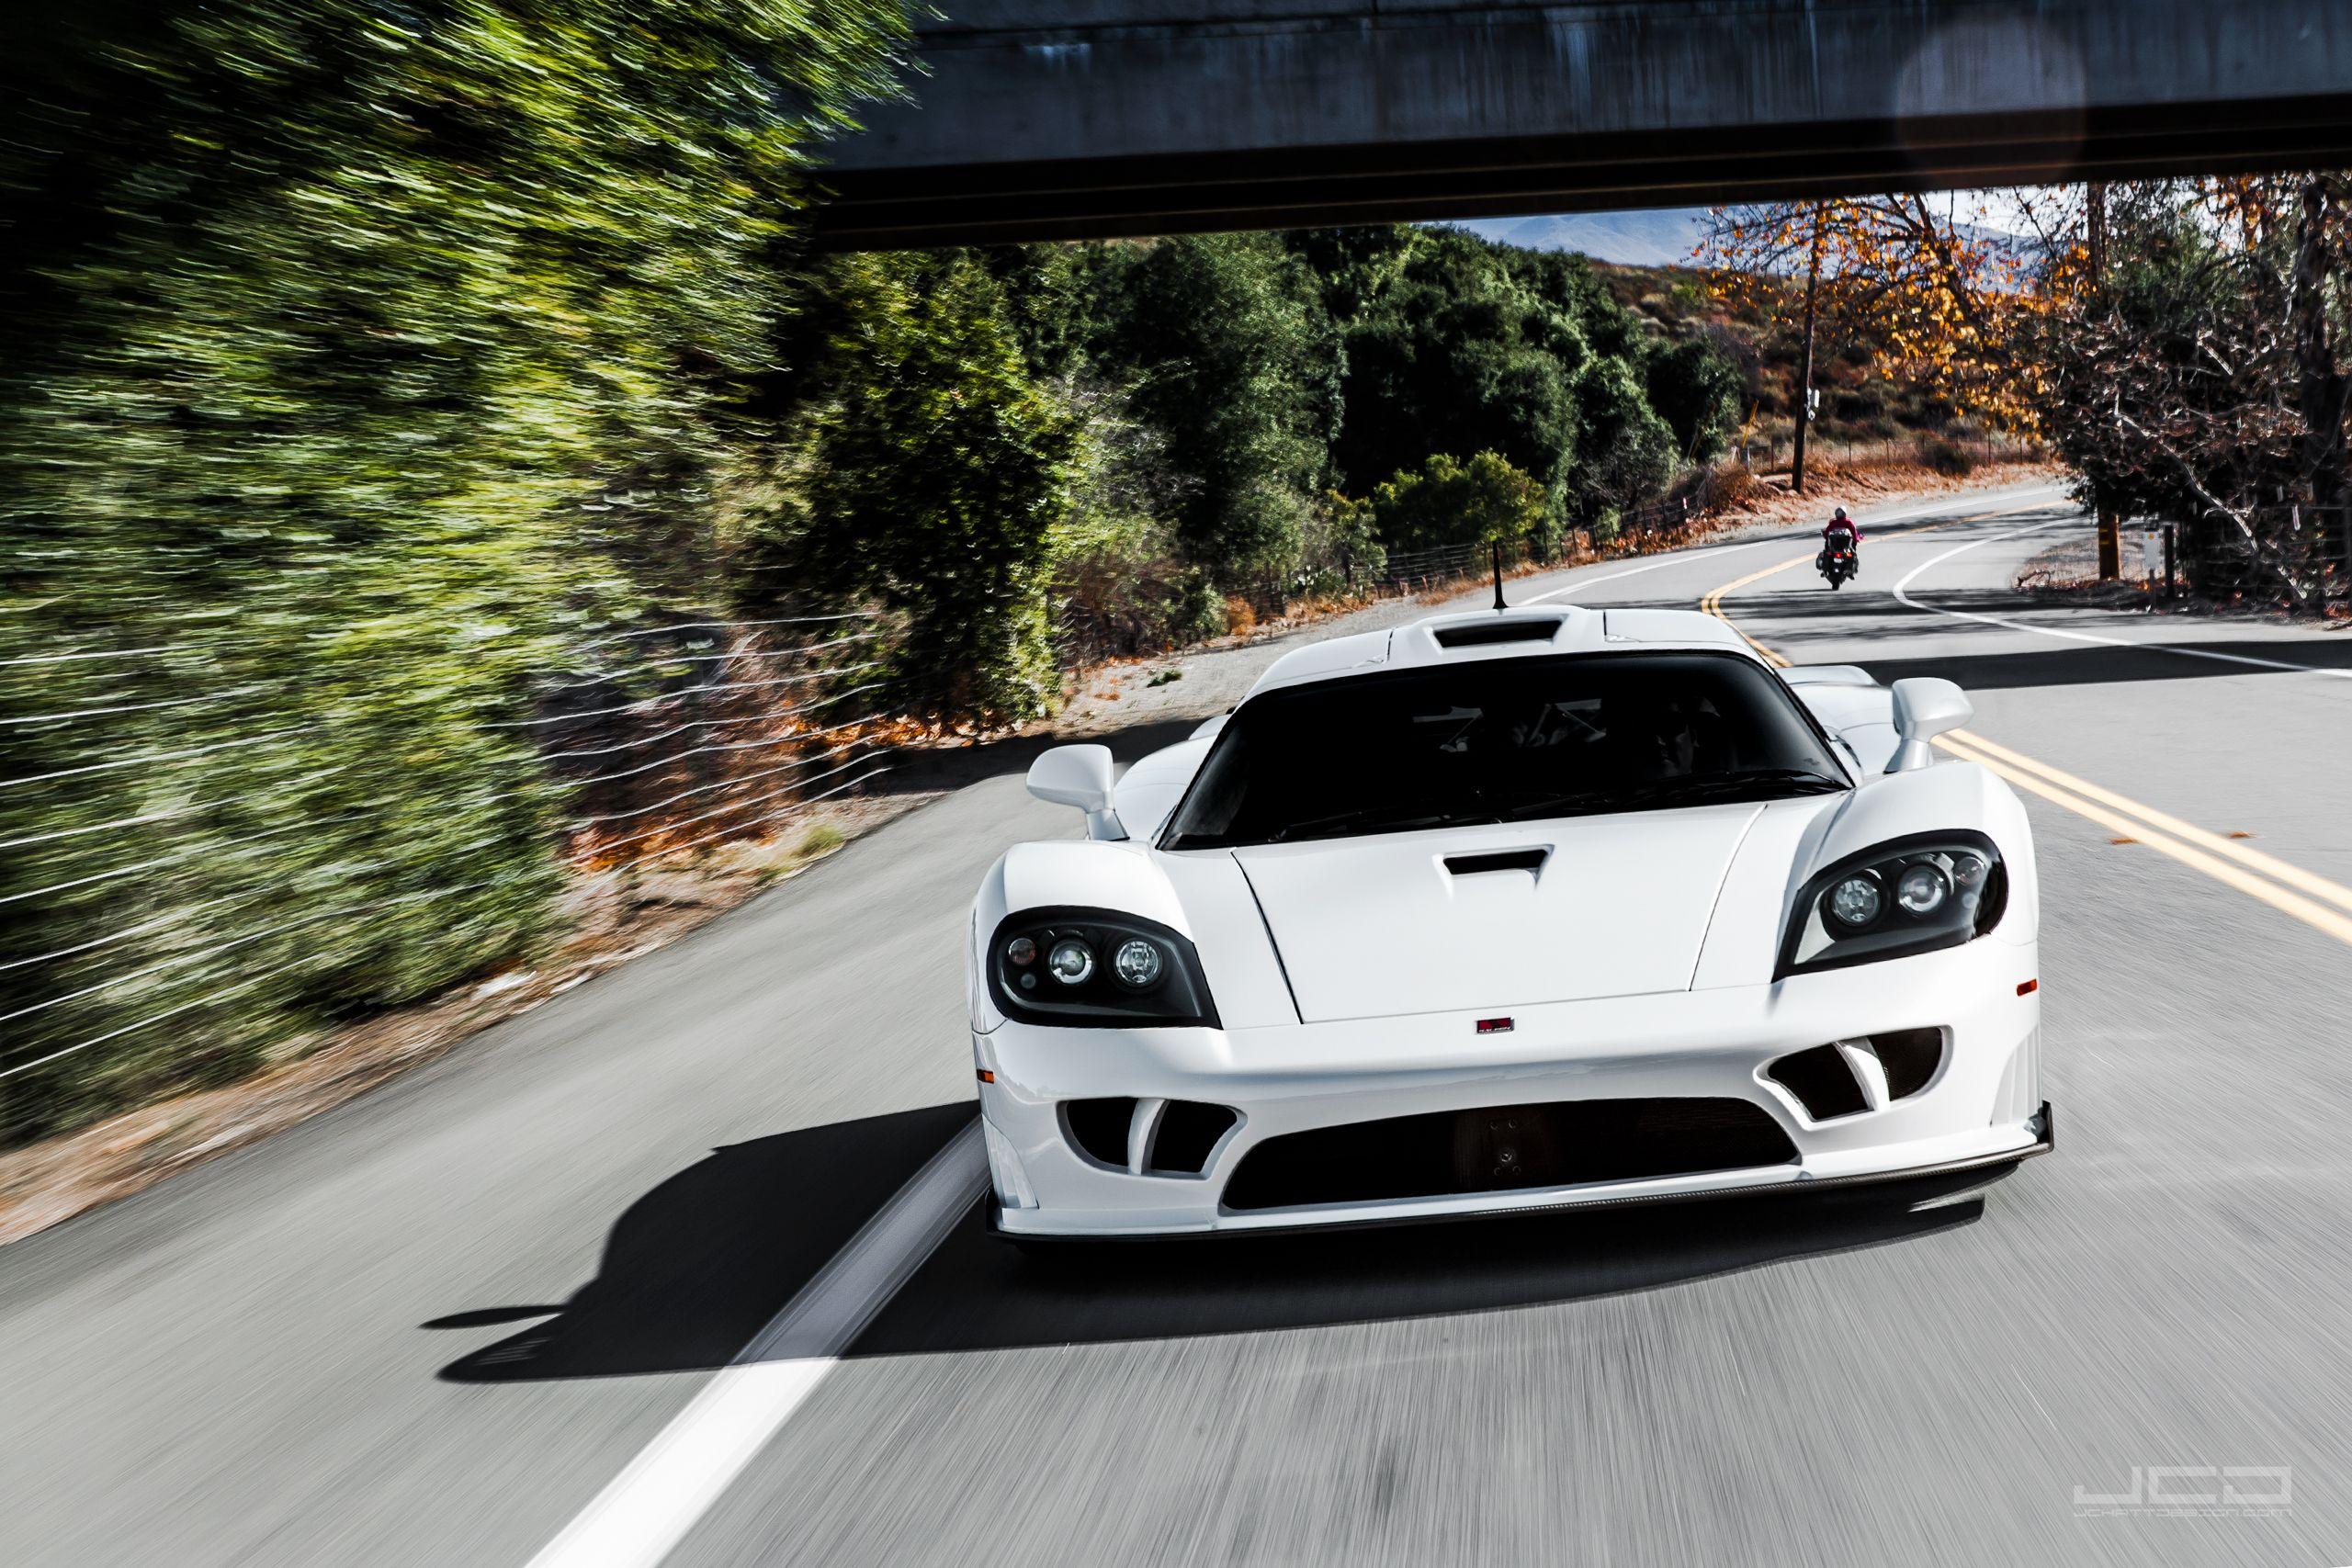 Your Ridiculously Awesome Saleen S7 Wallpaper Is Here